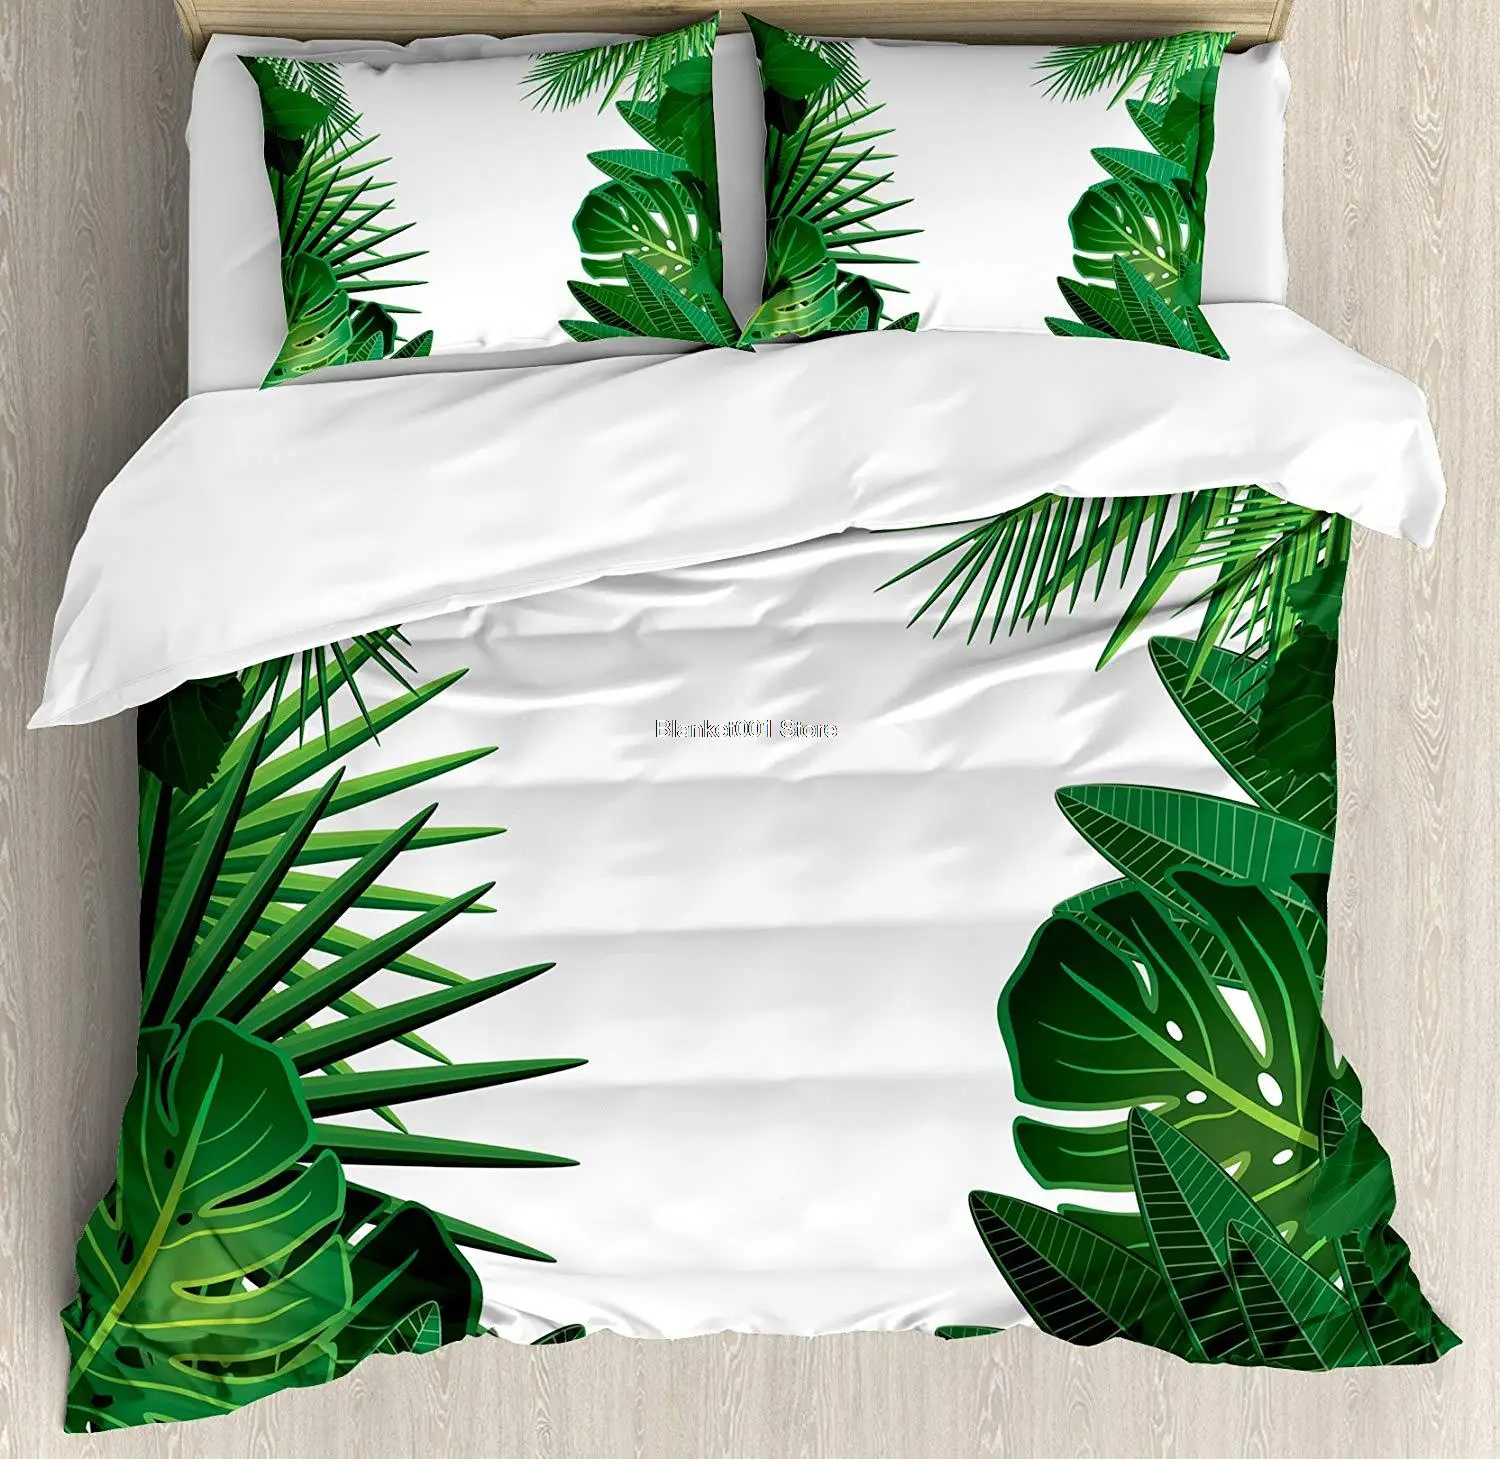 

Leaf Duvet Cover Set Exotic Fantasy Hawaiian Tropical Palm Leaves with Floral Graphic Artwork Print Decorative 3 Piece Bedding